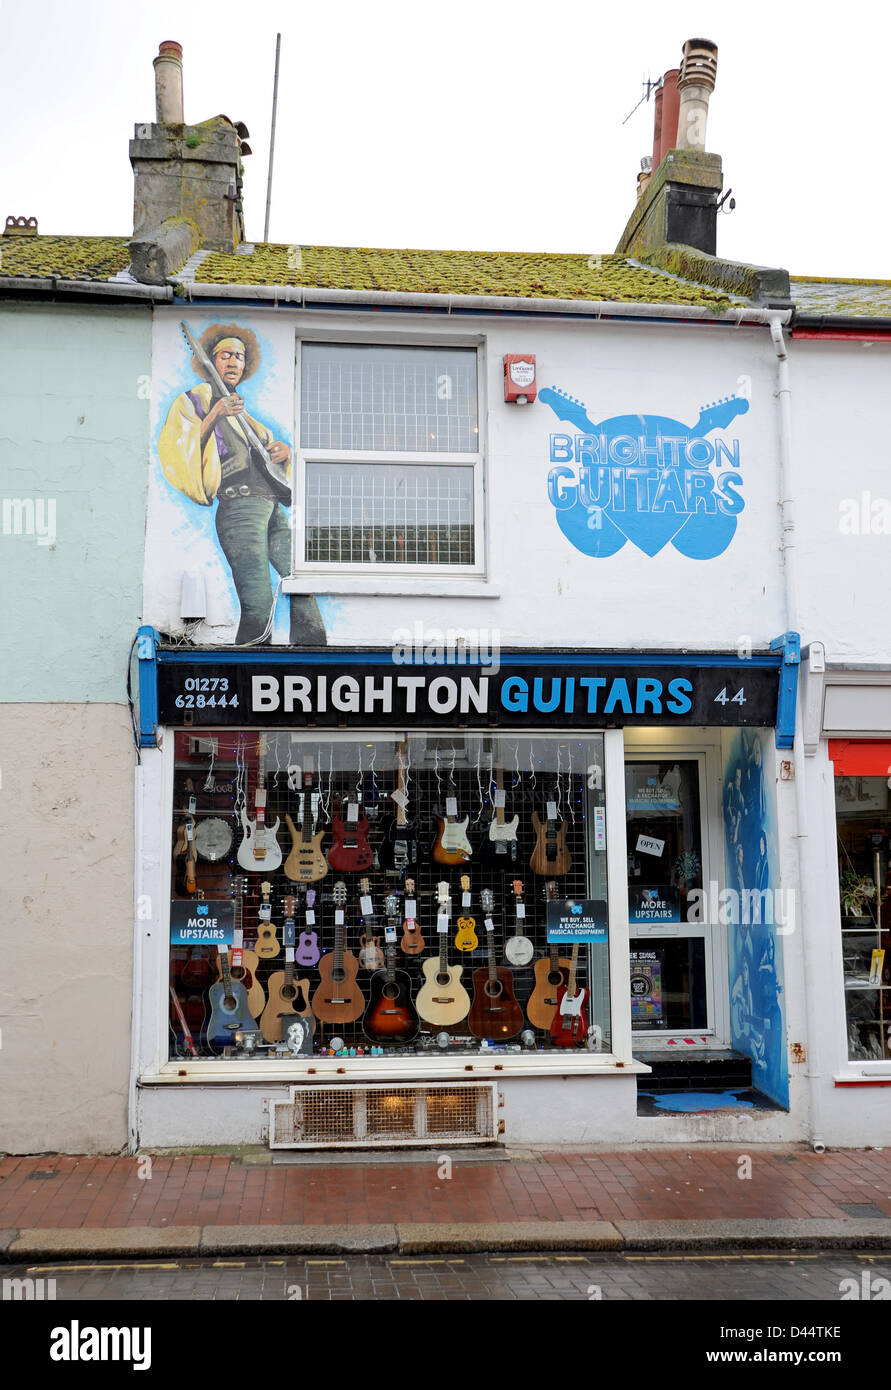 Brighton Guitars store in North Laine area of Brighton with a Jimi Hendrix mural on the wall Stock Photo